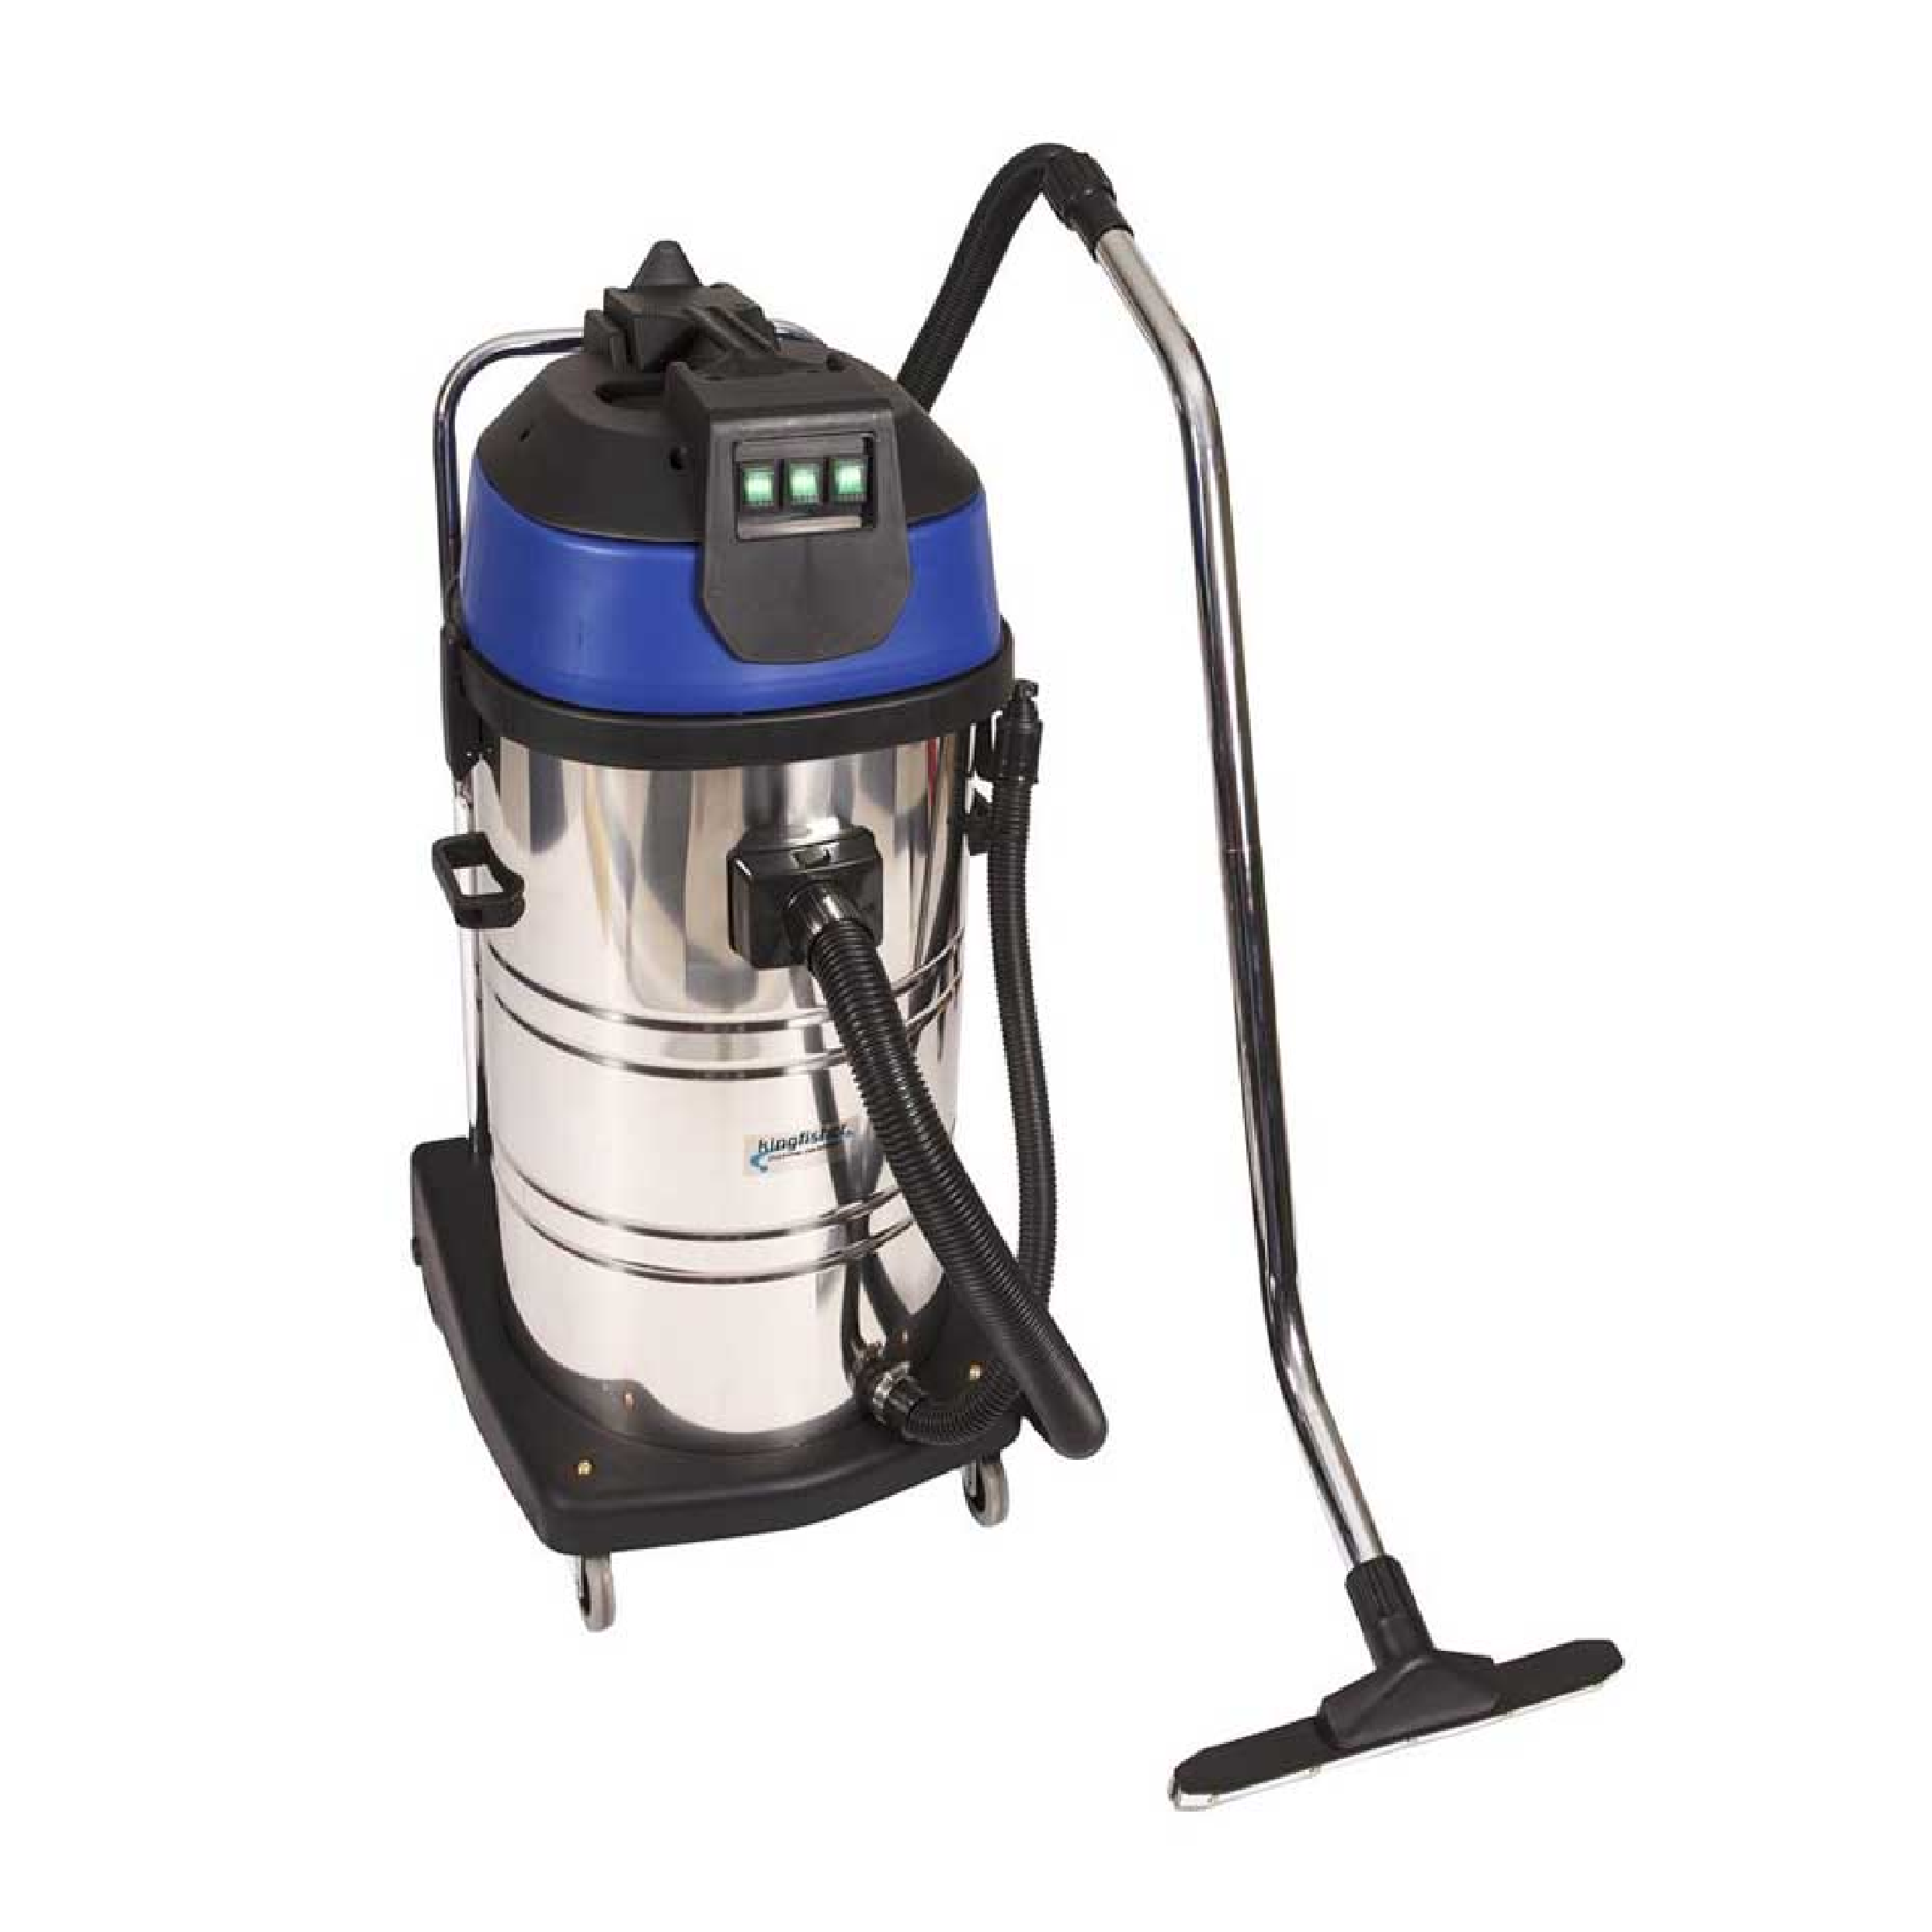 Airstrong 80L 3000W TRIPLE MOTOR Stainless Steel WET & DRY Vacuum Cleaner VC-HT80-3